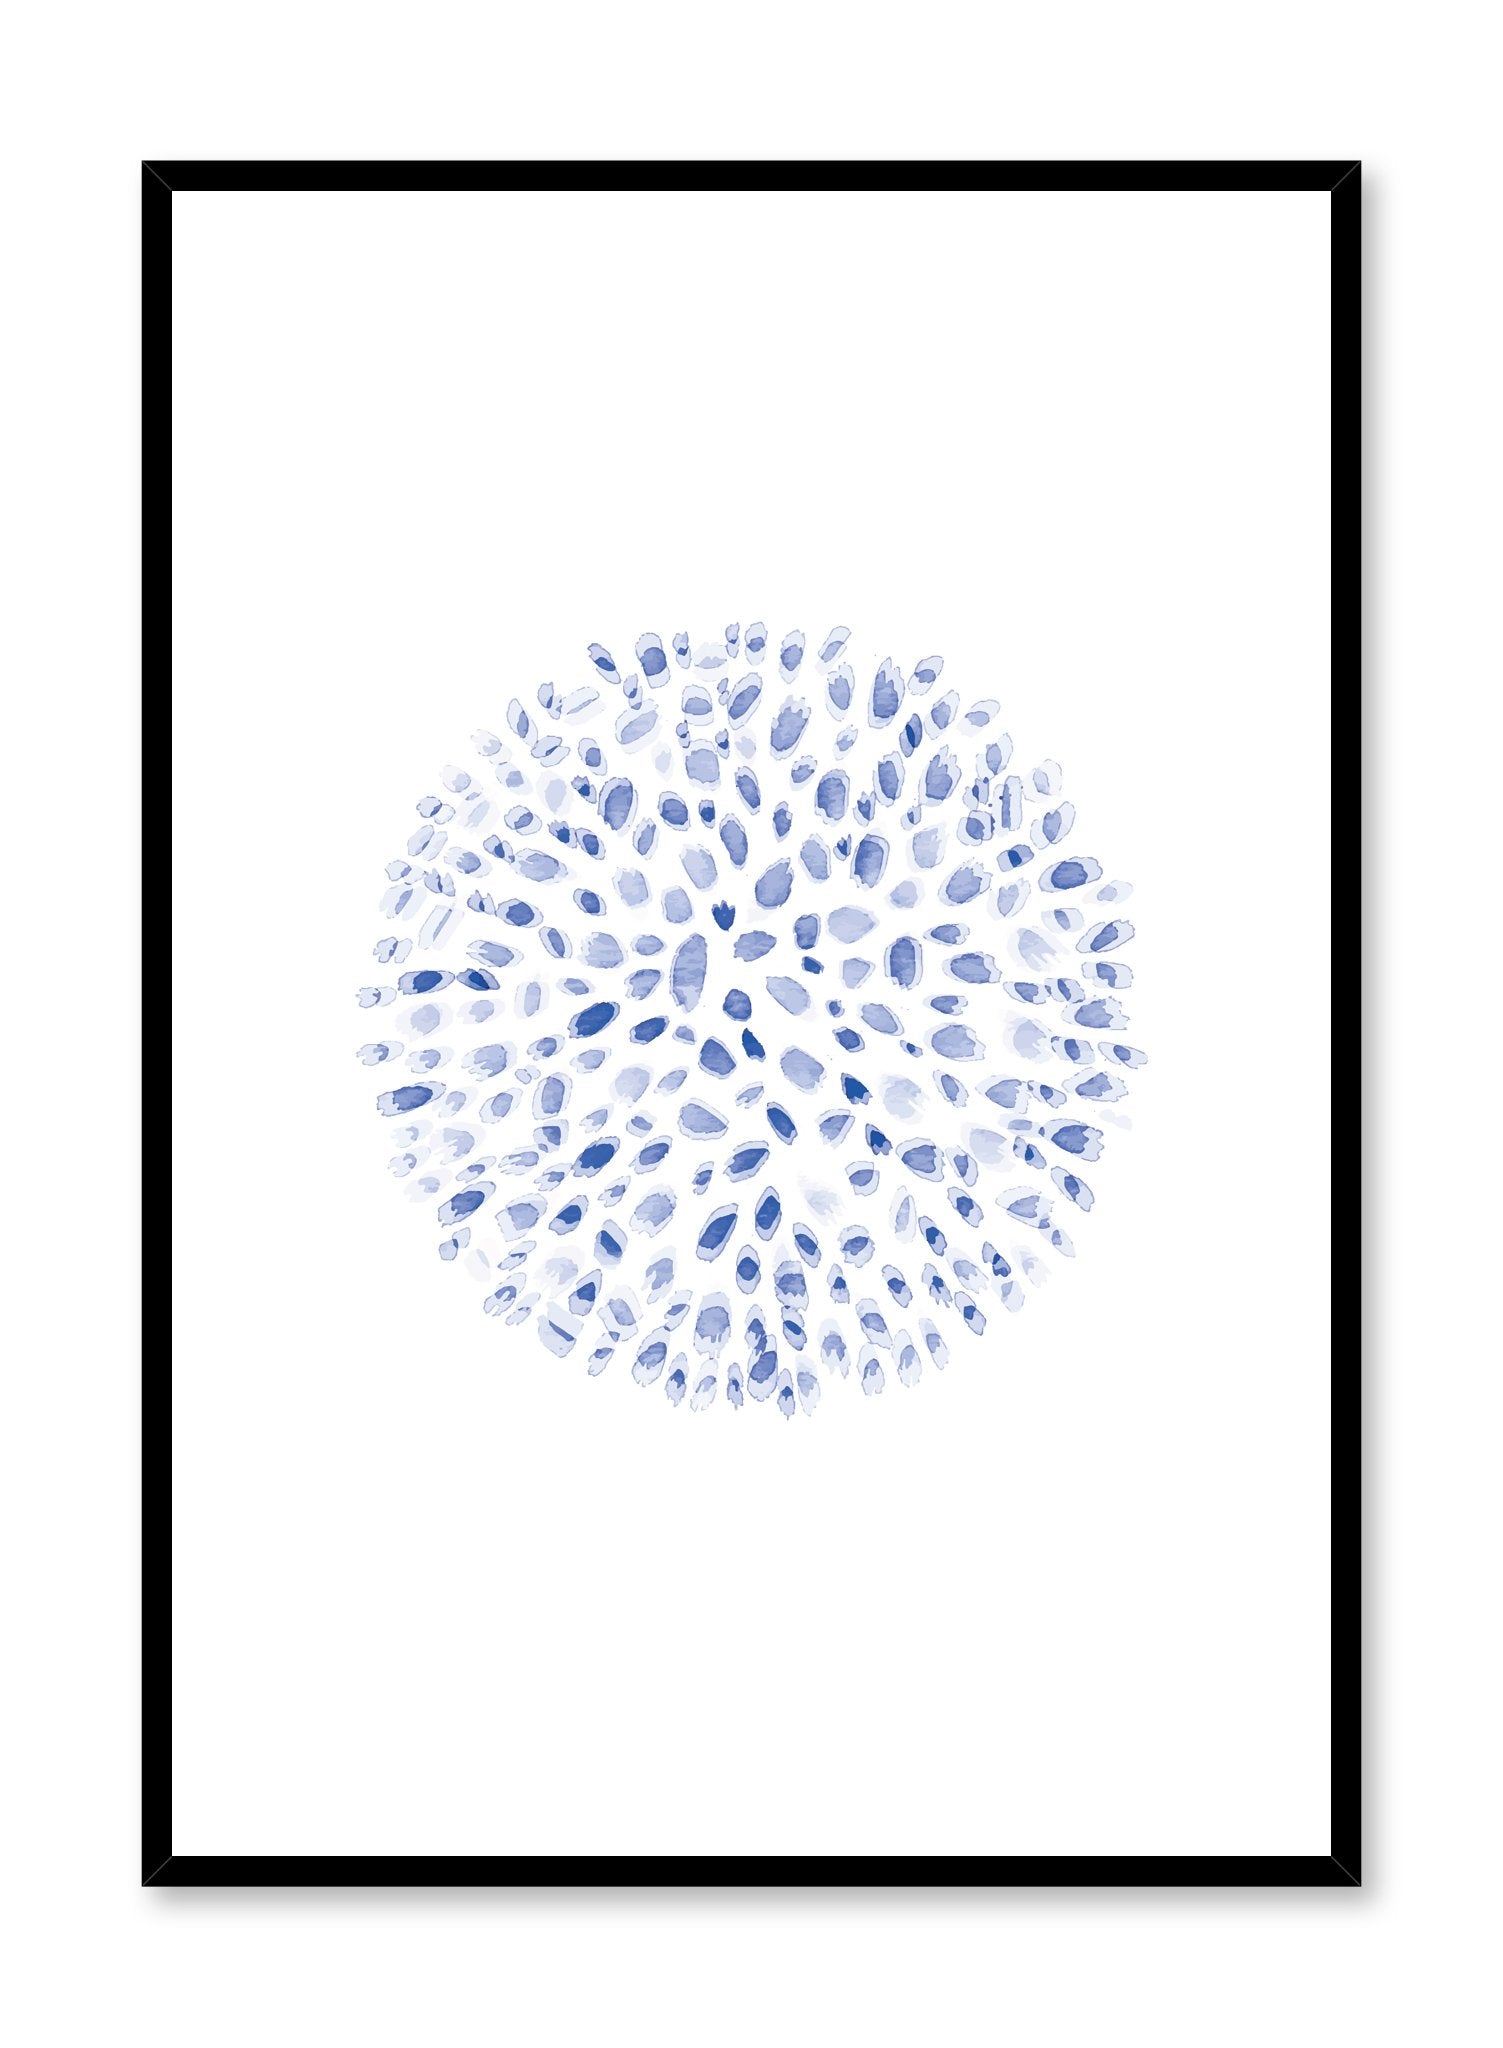 Modern minimalist poster by Opposite Wall with abstract illustration of Blue Dreams